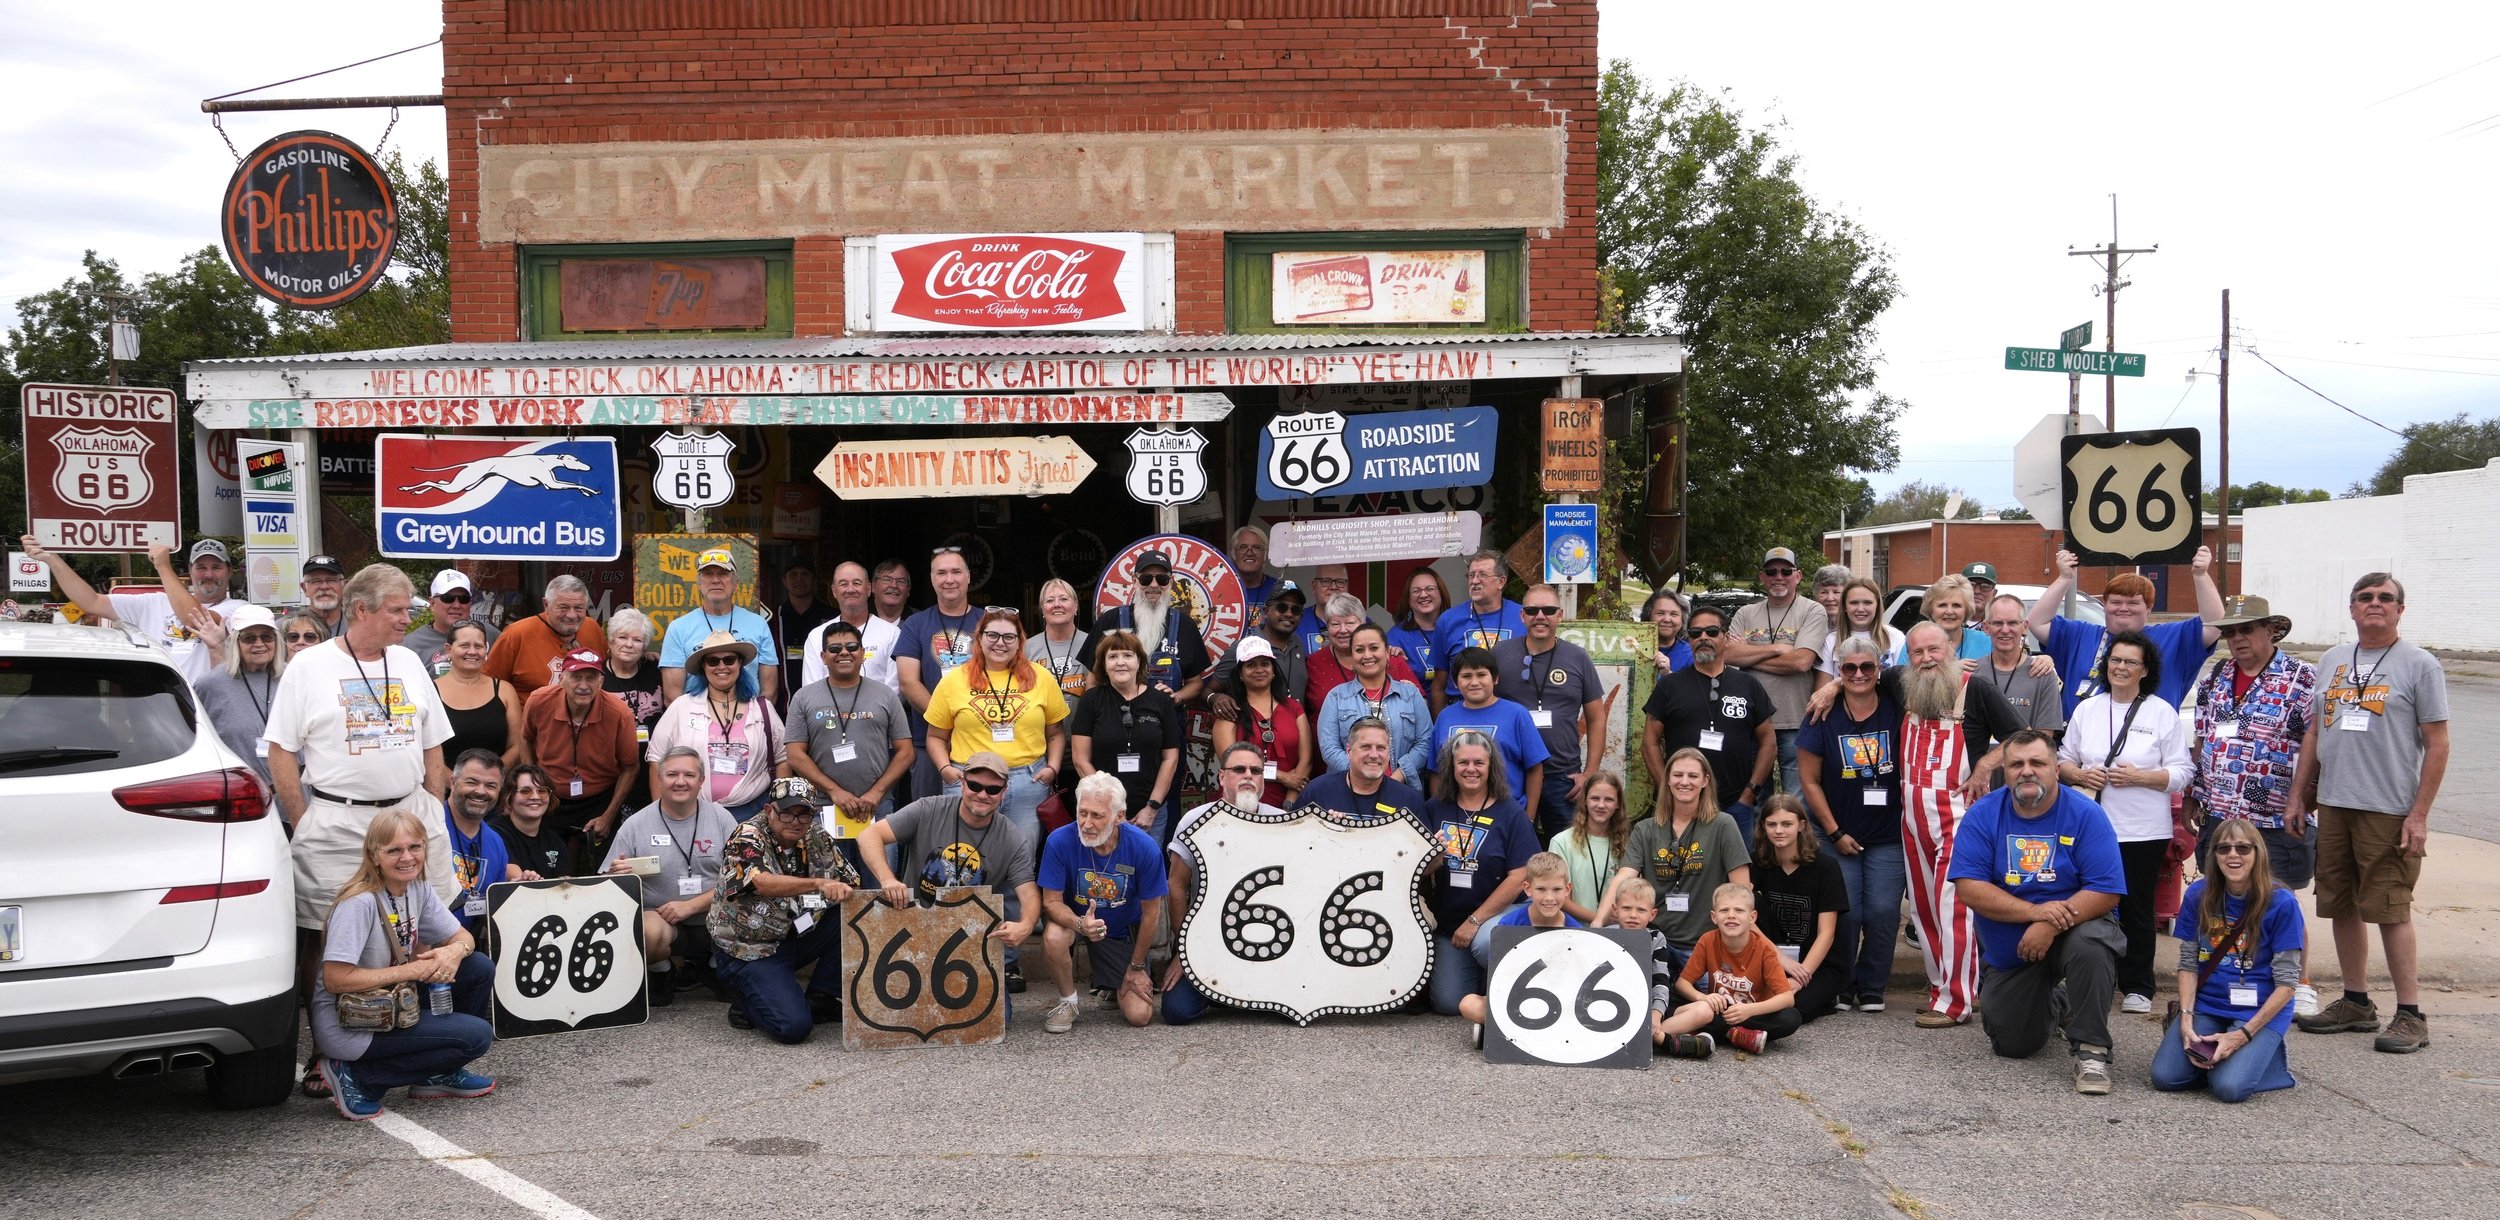  Group photo in front of the Sandhill Curiosity Shop, Erick, OK, Oct 6, 2023.  Harley Russell played guitar, sang, and entertained over 50 people.  Photo by Rich Dinkela. 